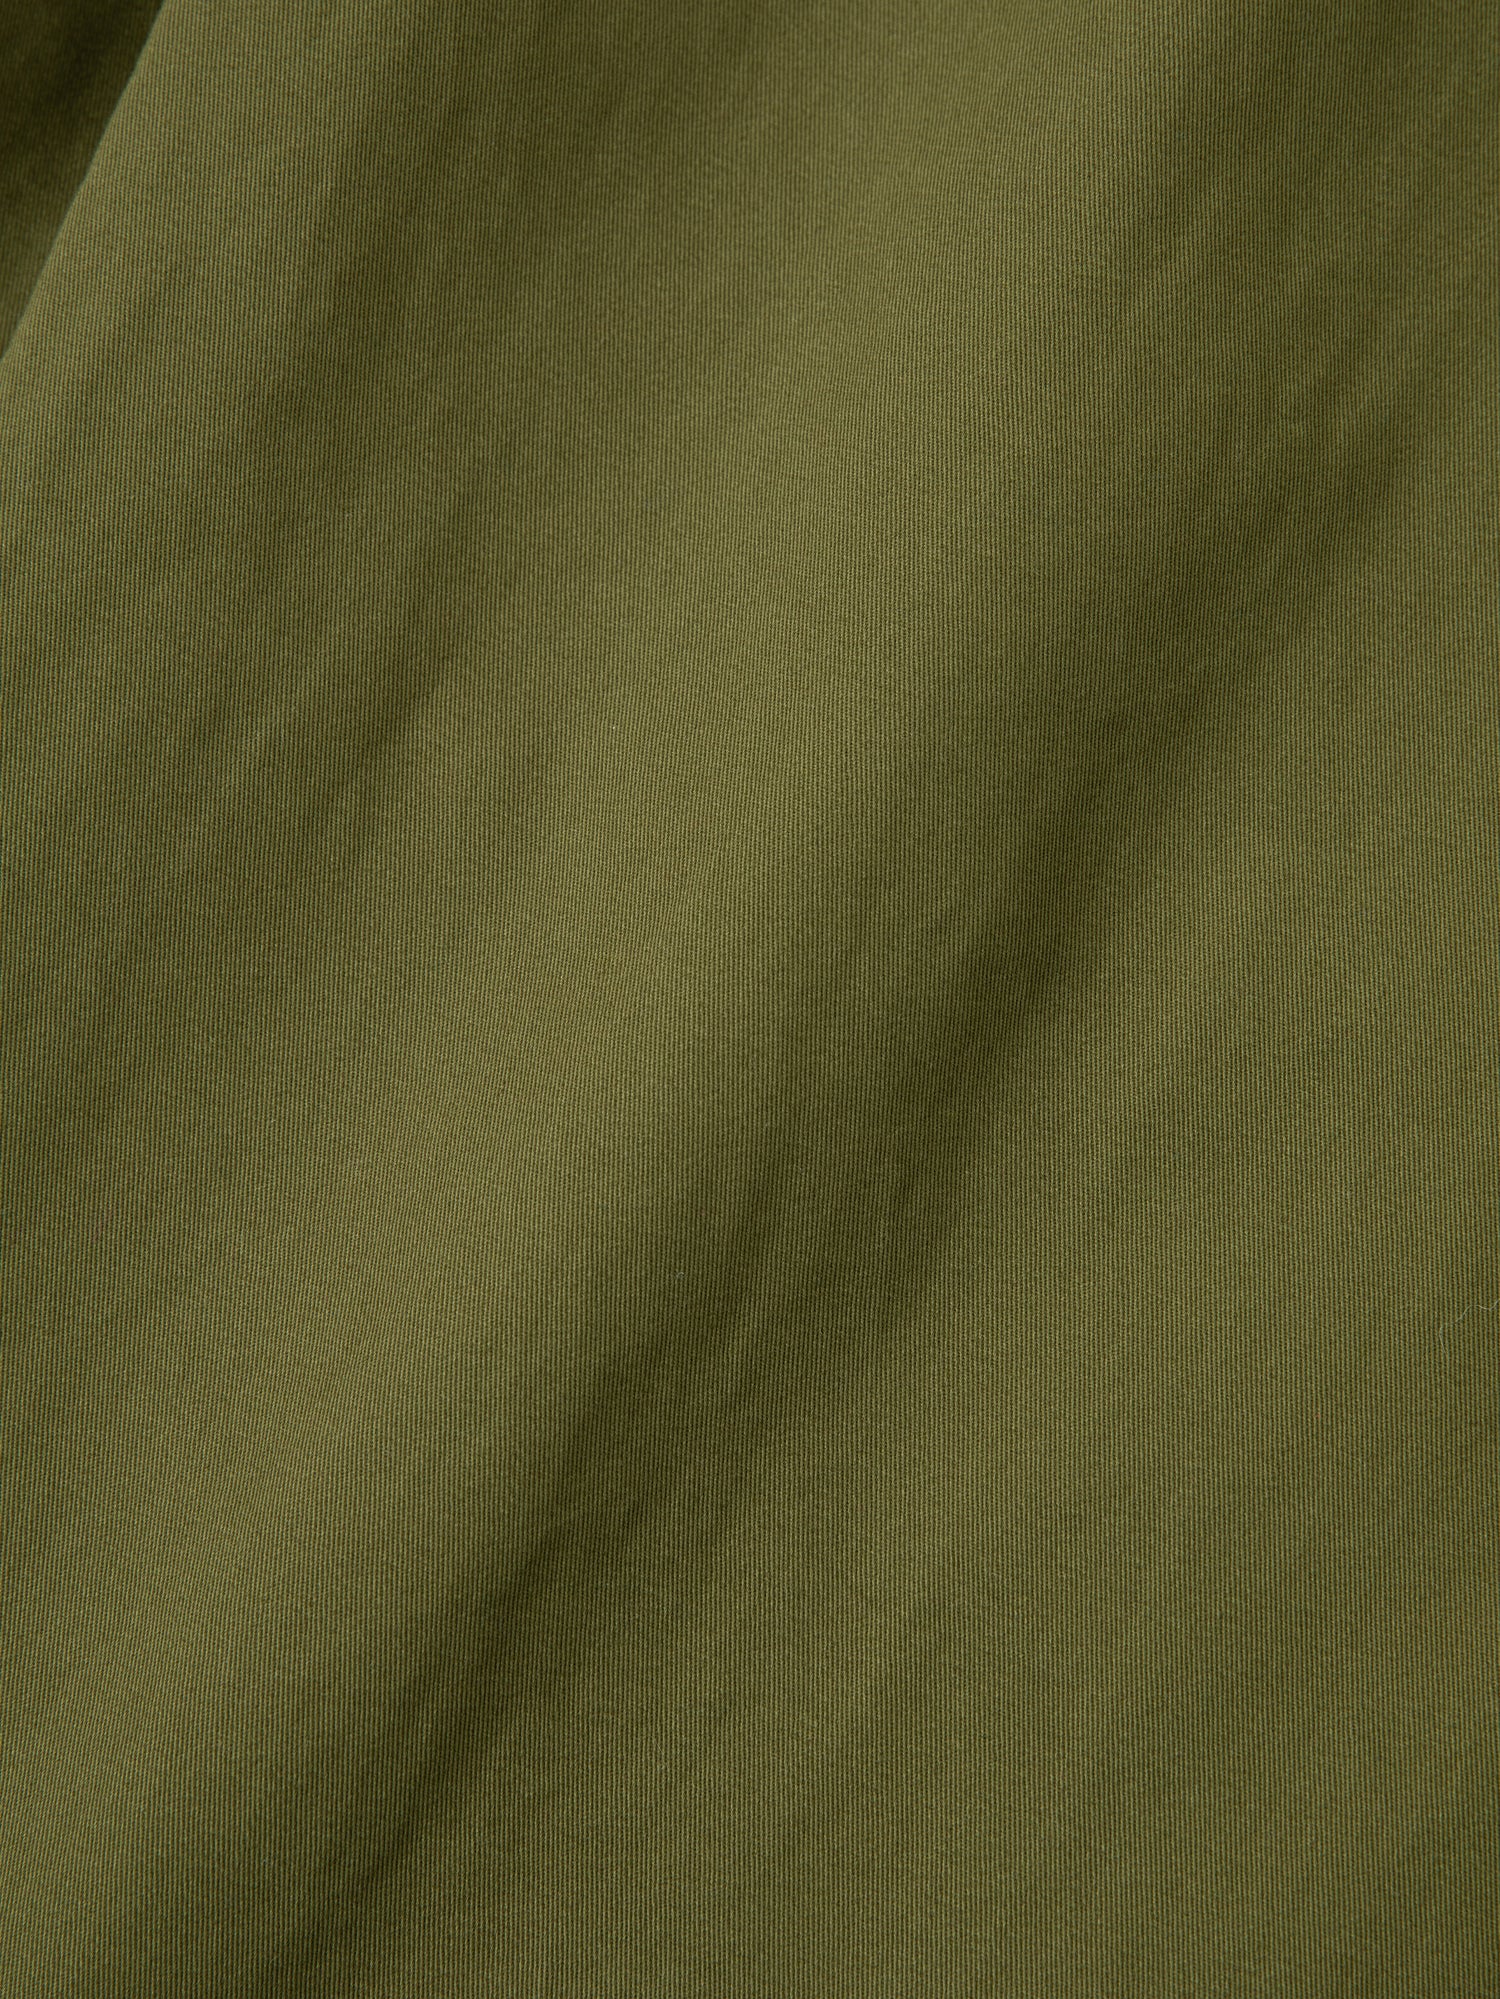 A close up image of Found Parachute Cargo Twill Pants in an olive green fabric.